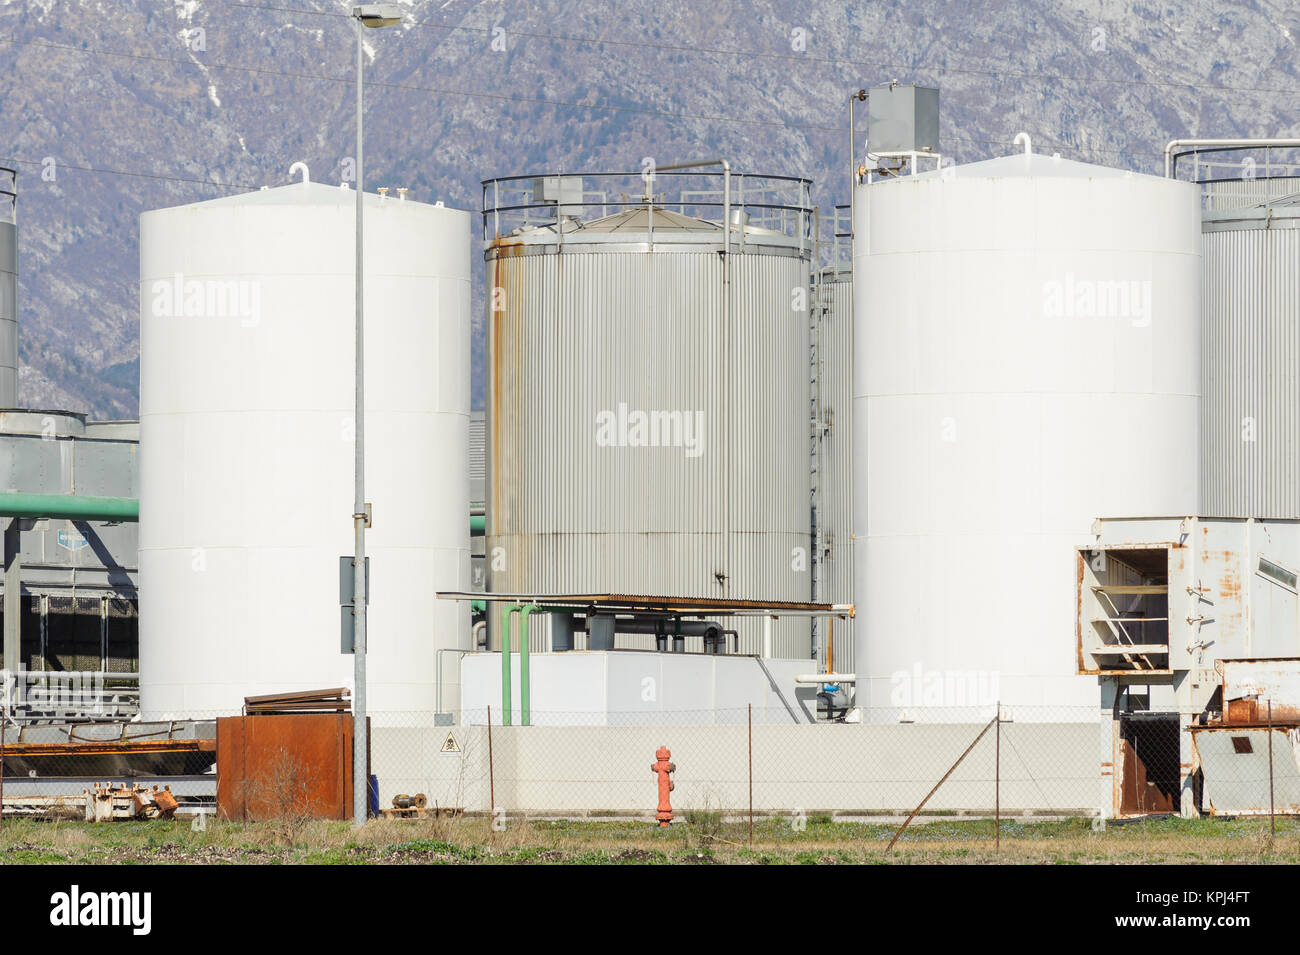 Silos of a chemical plant. Stock Photo